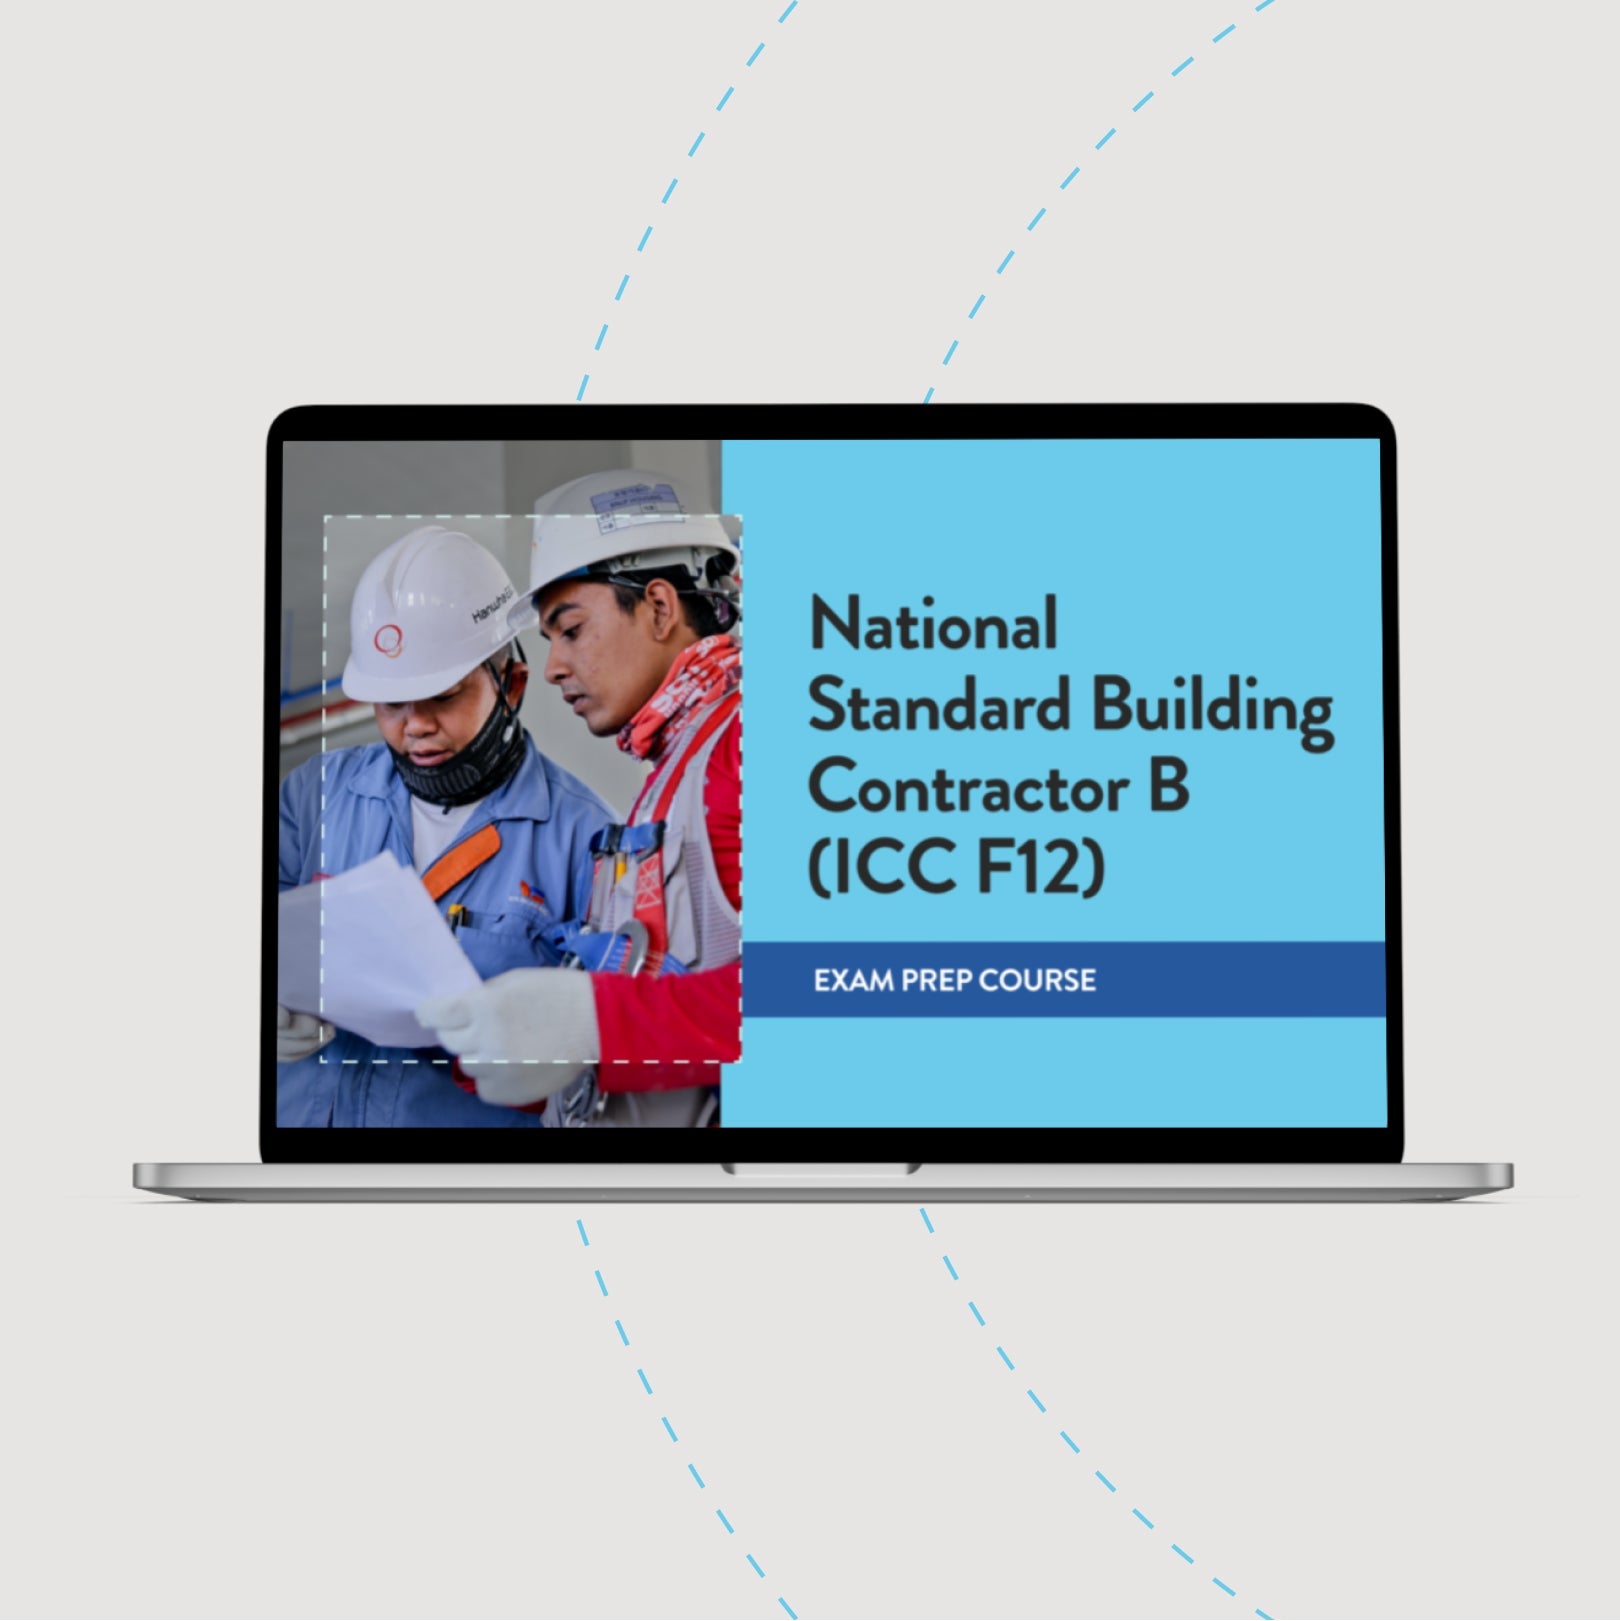 National Standard Building Contractor B (ICC F12) Exam Prep Course